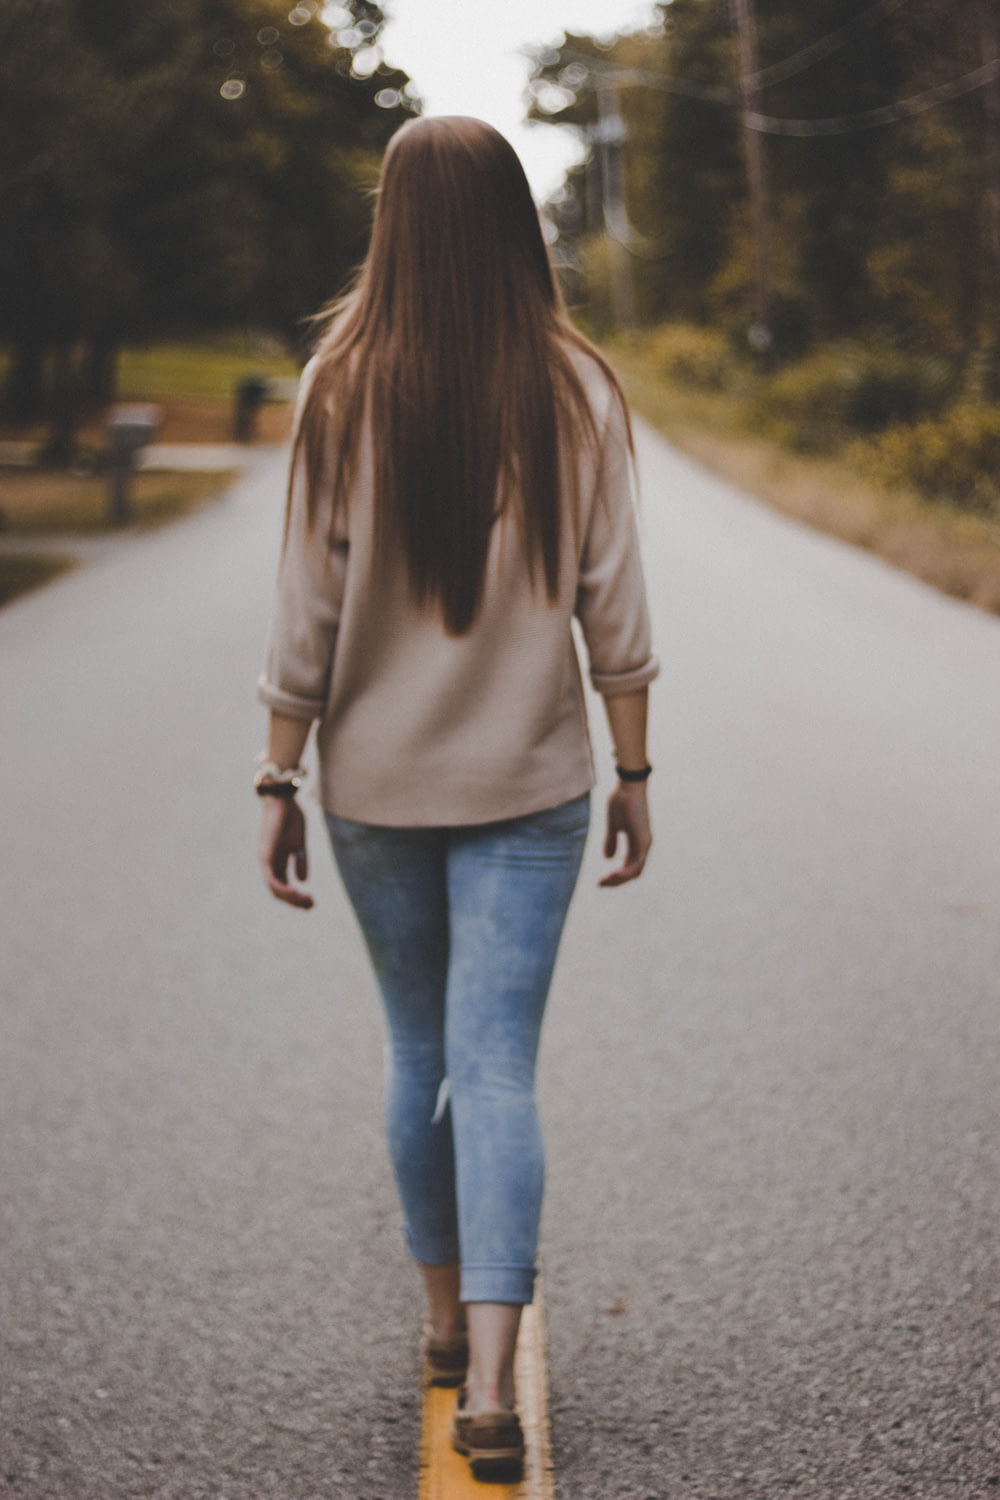 woman in grey shirt and blue denim pants walking on road during daytime